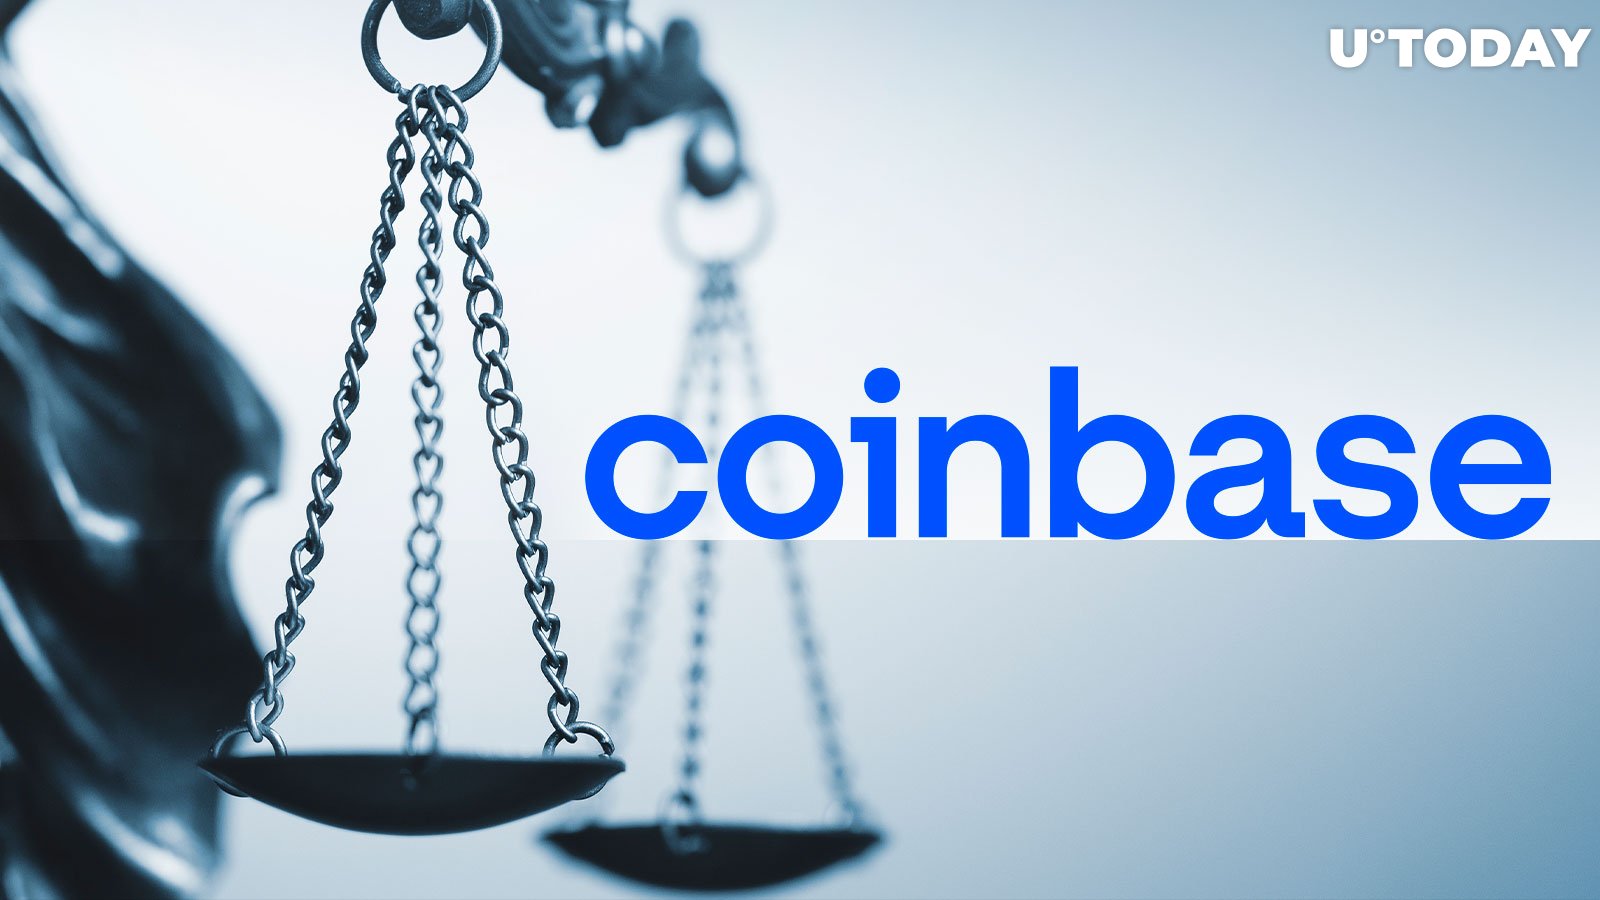 New Coinbase Lawsuit Suggests Solana (SOL), NEAR (NEAR), Stellar (XLM) And Other Coins Are Securities